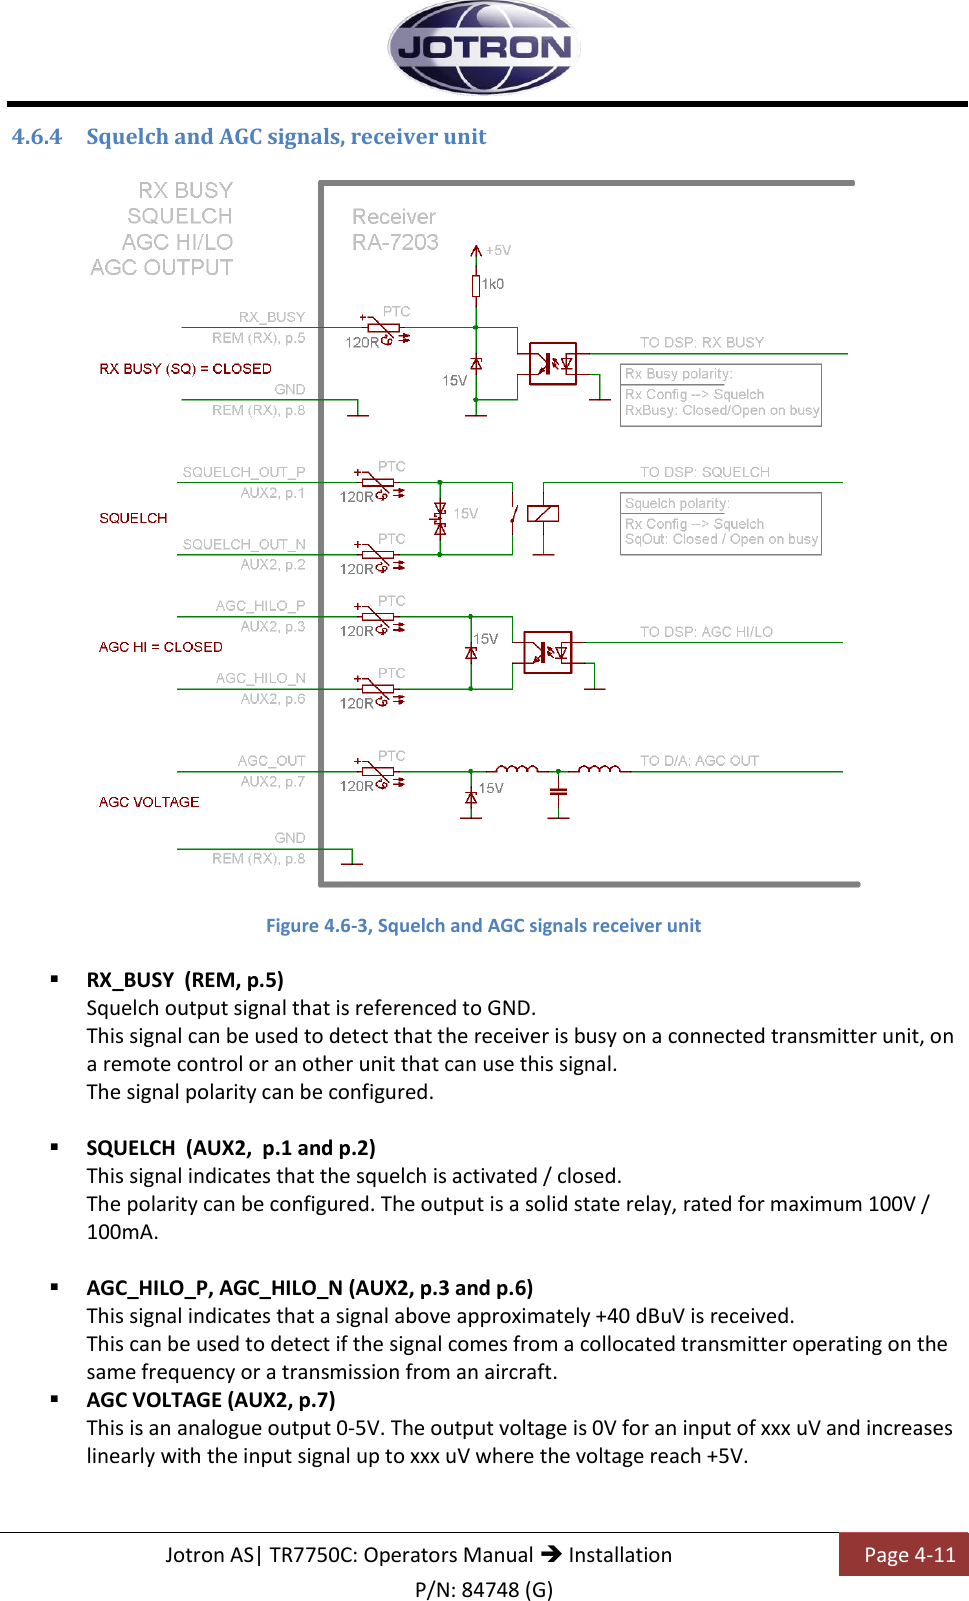   Jotron AS| TR7750C: Operators Manual  Installation Page 4-11 P/N: 84748 (G) 4.6.4 Squelch and AGC signals, receiver unit    Figure 4.6-3, Squelch and AGC signals receiver unit   RX_BUSY  (REM, p.5) Squelch output signal that is referenced to GND. This signal can be used to detect that the receiver is busy on a connected transmitter unit, on a remote control or an other unit that can use this signal. The signal polarity can be configured.   SQUELCH  (AUX2,  p.1 and p.2) This signal indicates that the squelch is activated / closed. The polarity can be configured. The output is a solid state relay, rated for maximum 100V / 100mA.   AGC_HILO_P, AGC_HILO_N (AUX2, p.3 and p.6) This signal indicates that a signal above approximately +40 dBuV is received. This can be used to detect if the signal comes from a collocated transmitter operating on the same frequency or a transmission from an aircraft.  AGC VOLTAGE (AUX2, p.7) This is an analogue output 0-5V. The output voltage is 0V for an input of xxx uV and increases linearly with the input signal up to xxx uV where the voltage reach +5V.  